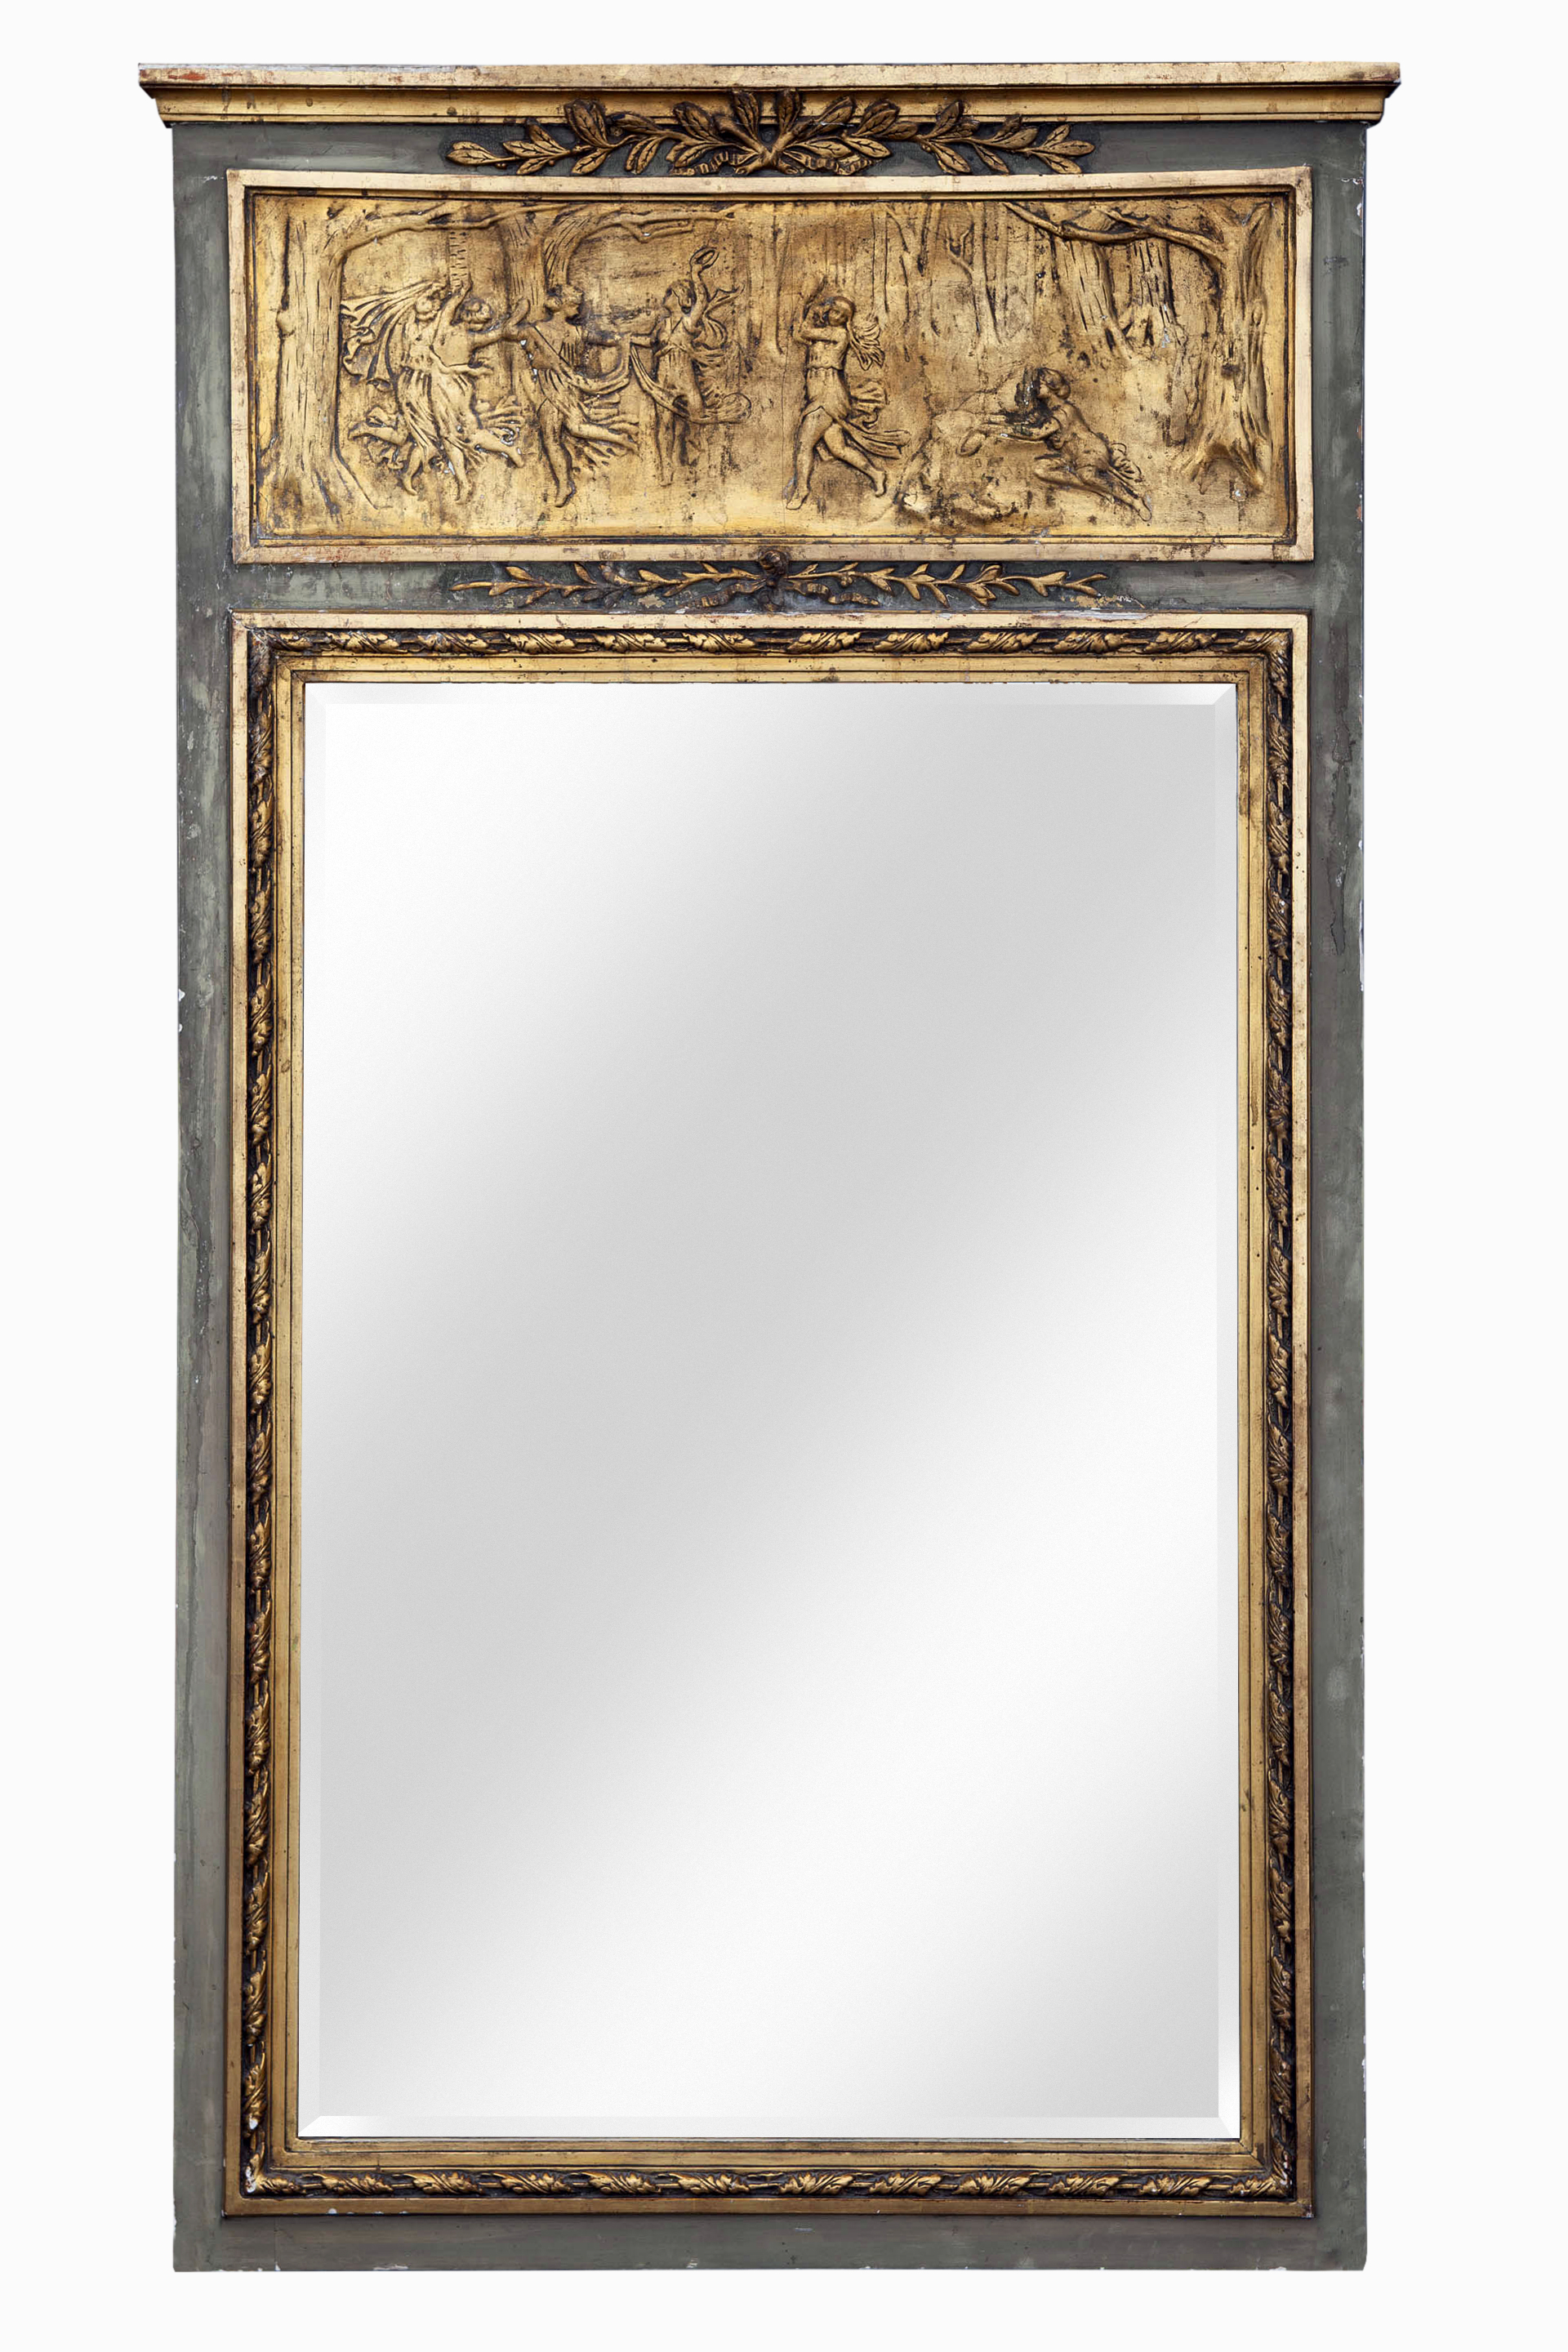 Trumeau Mirror with Dancers in Giltwood~P77653525